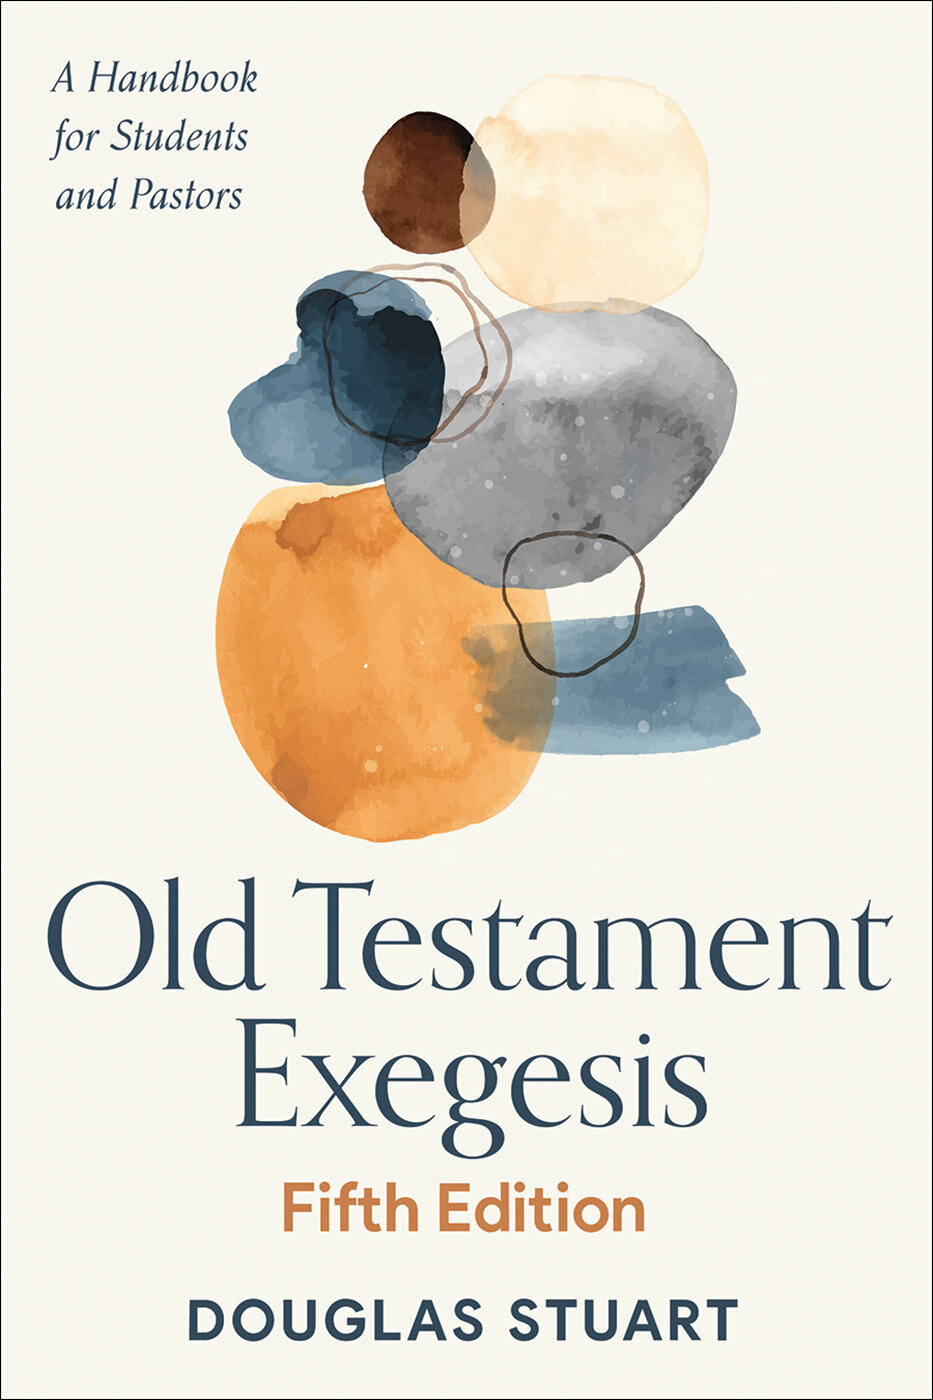 Old Testament Exegesis: A Handbook for Students and Pastors, 5th ed.